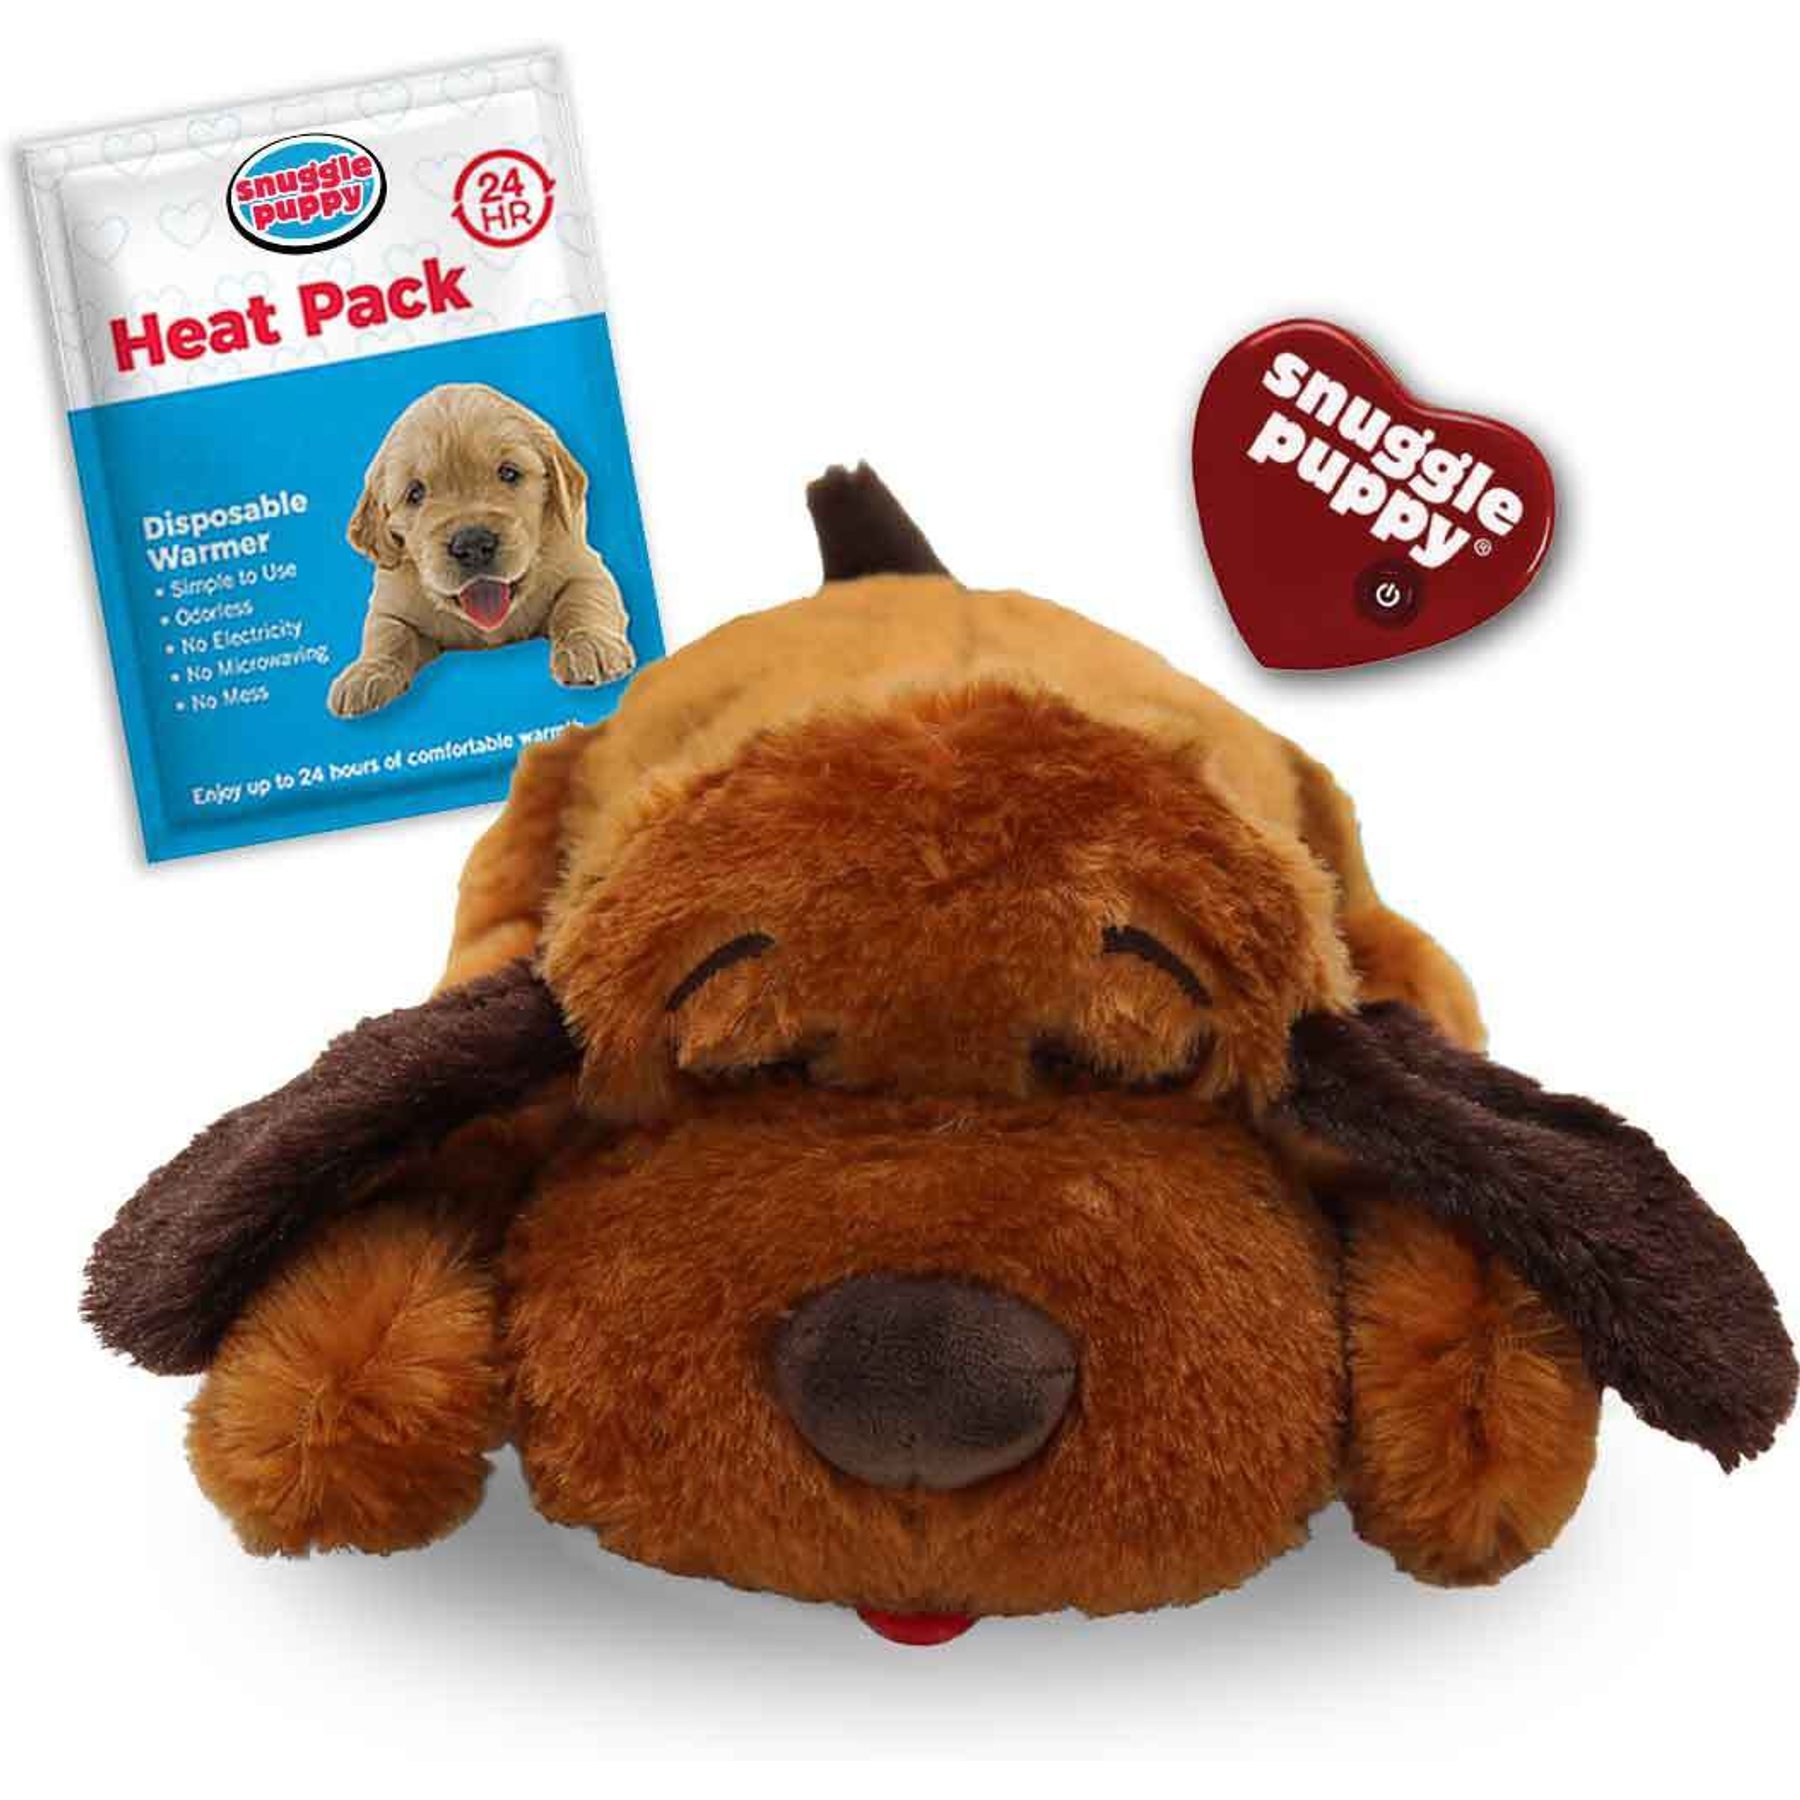 WEOK Heartbeat Puppy Toy, Dog Anxiety Relief Toys with Heartbeat, Dog  Heartbeat Toy Bed Mat for Anxiety, Puppy Heartbeat Sleep Aid Comfort Toy  for